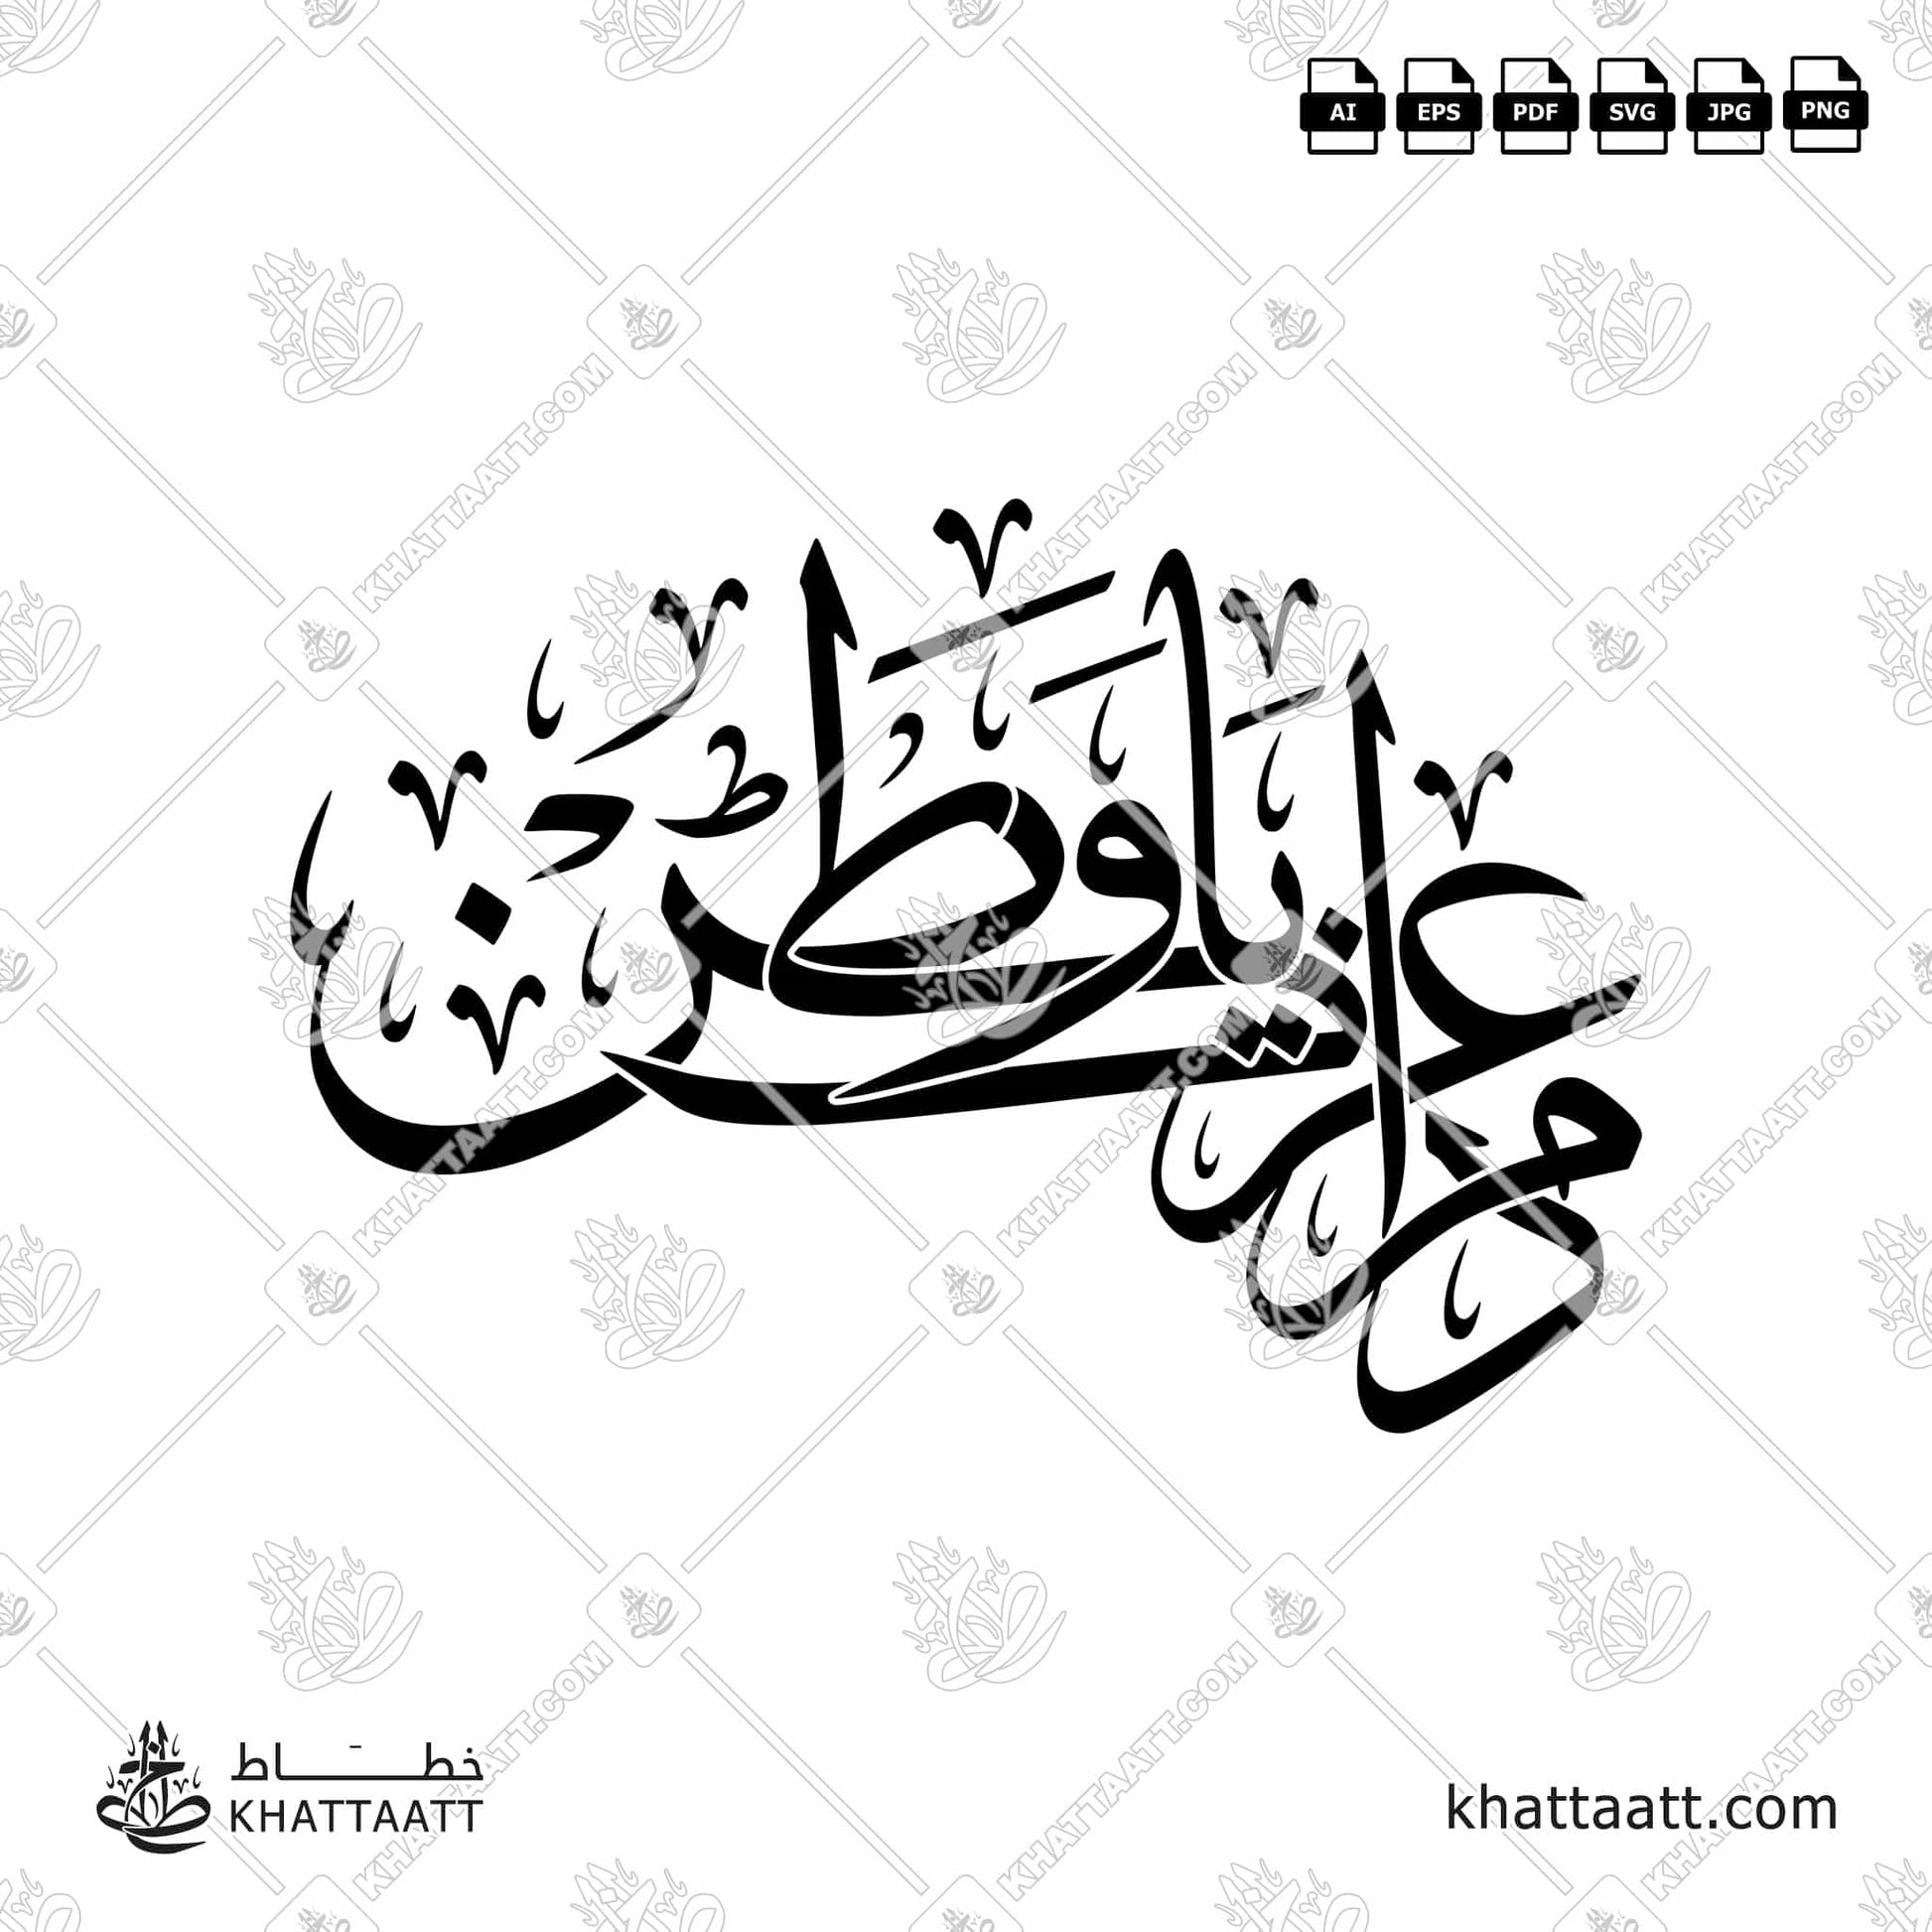 Download Arabic Calligraphy of دام عزك يا وطن in Thuluth Script خط الثلث vector ai eps pdf svg jpg png